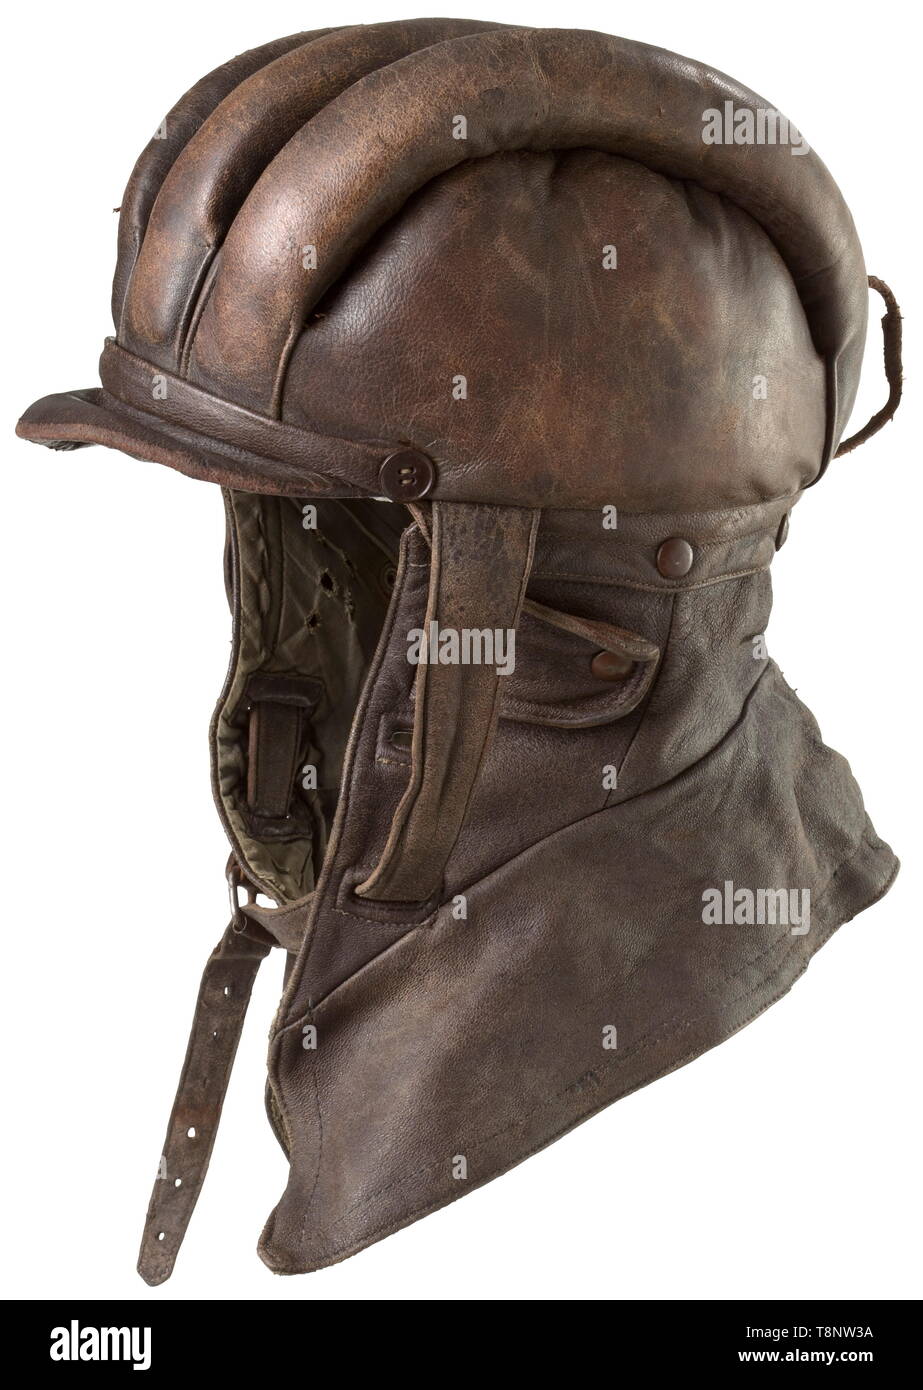 A protective leather helmet for balloon observers Brown leather. Three padded rolls at top, ear flaps with press button closure at sides, leather visor. Removable neck guard, seven brown lacquered iron press buttons. Chinstrap with metal loop. Leather loop for fastening of aviator goggles at back. Grey-green wool lining, brown leather sweatband. No maker's mark visible. The helmet resembles the helmets worn in the Prussian flying corps. The balloon observers were used as the artillery's 'eye'. At the beginning of the First World War, they were the primary target of the enem, Editorial-Use-Only Stock Photo